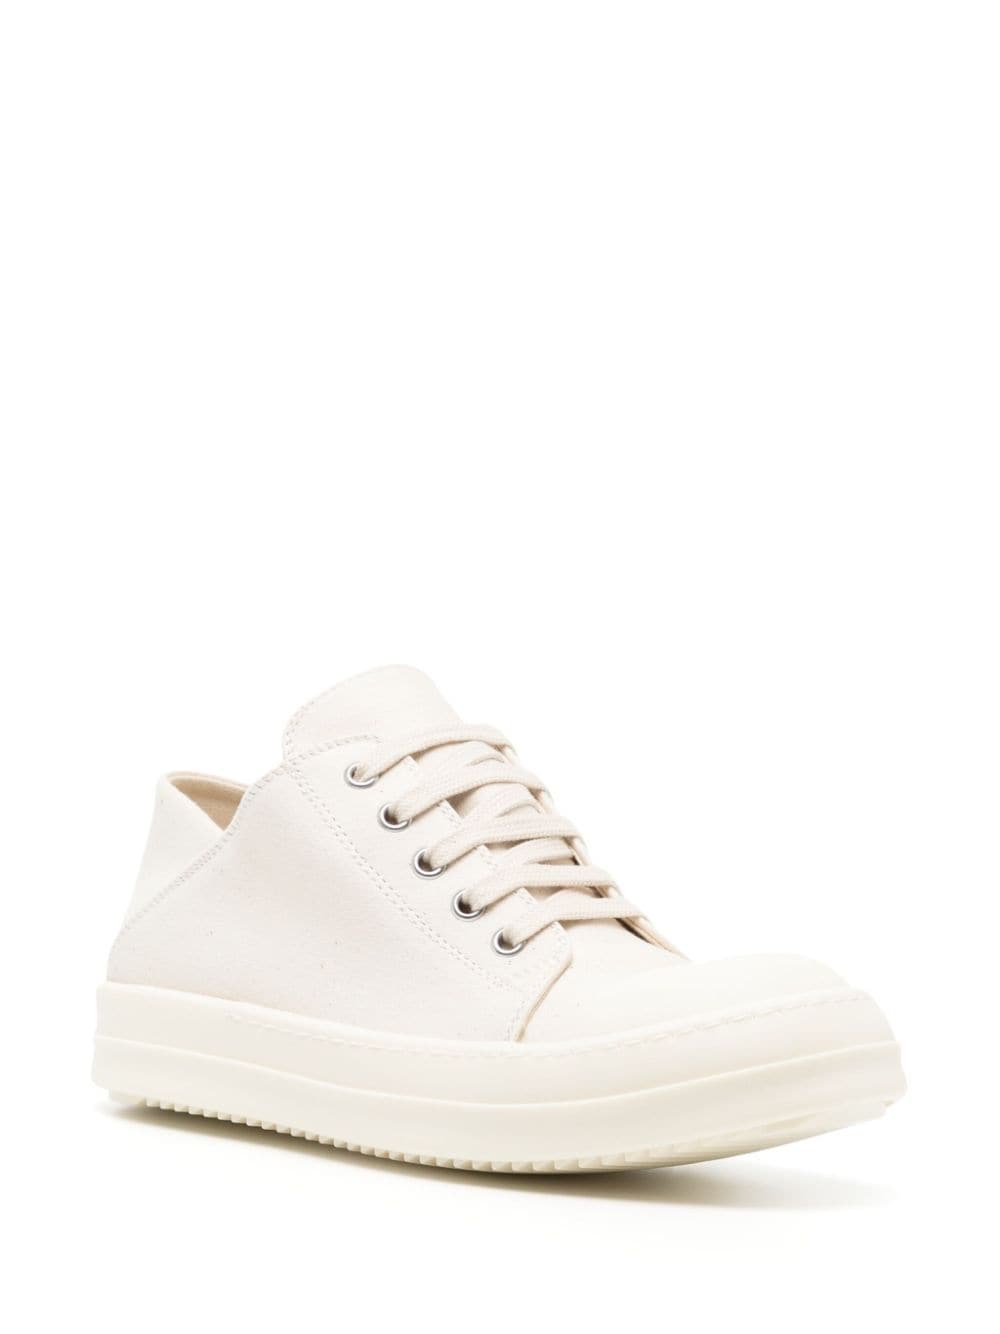 Image 2 of Rick Owens DRKSHDW lace-up canvas sneakers